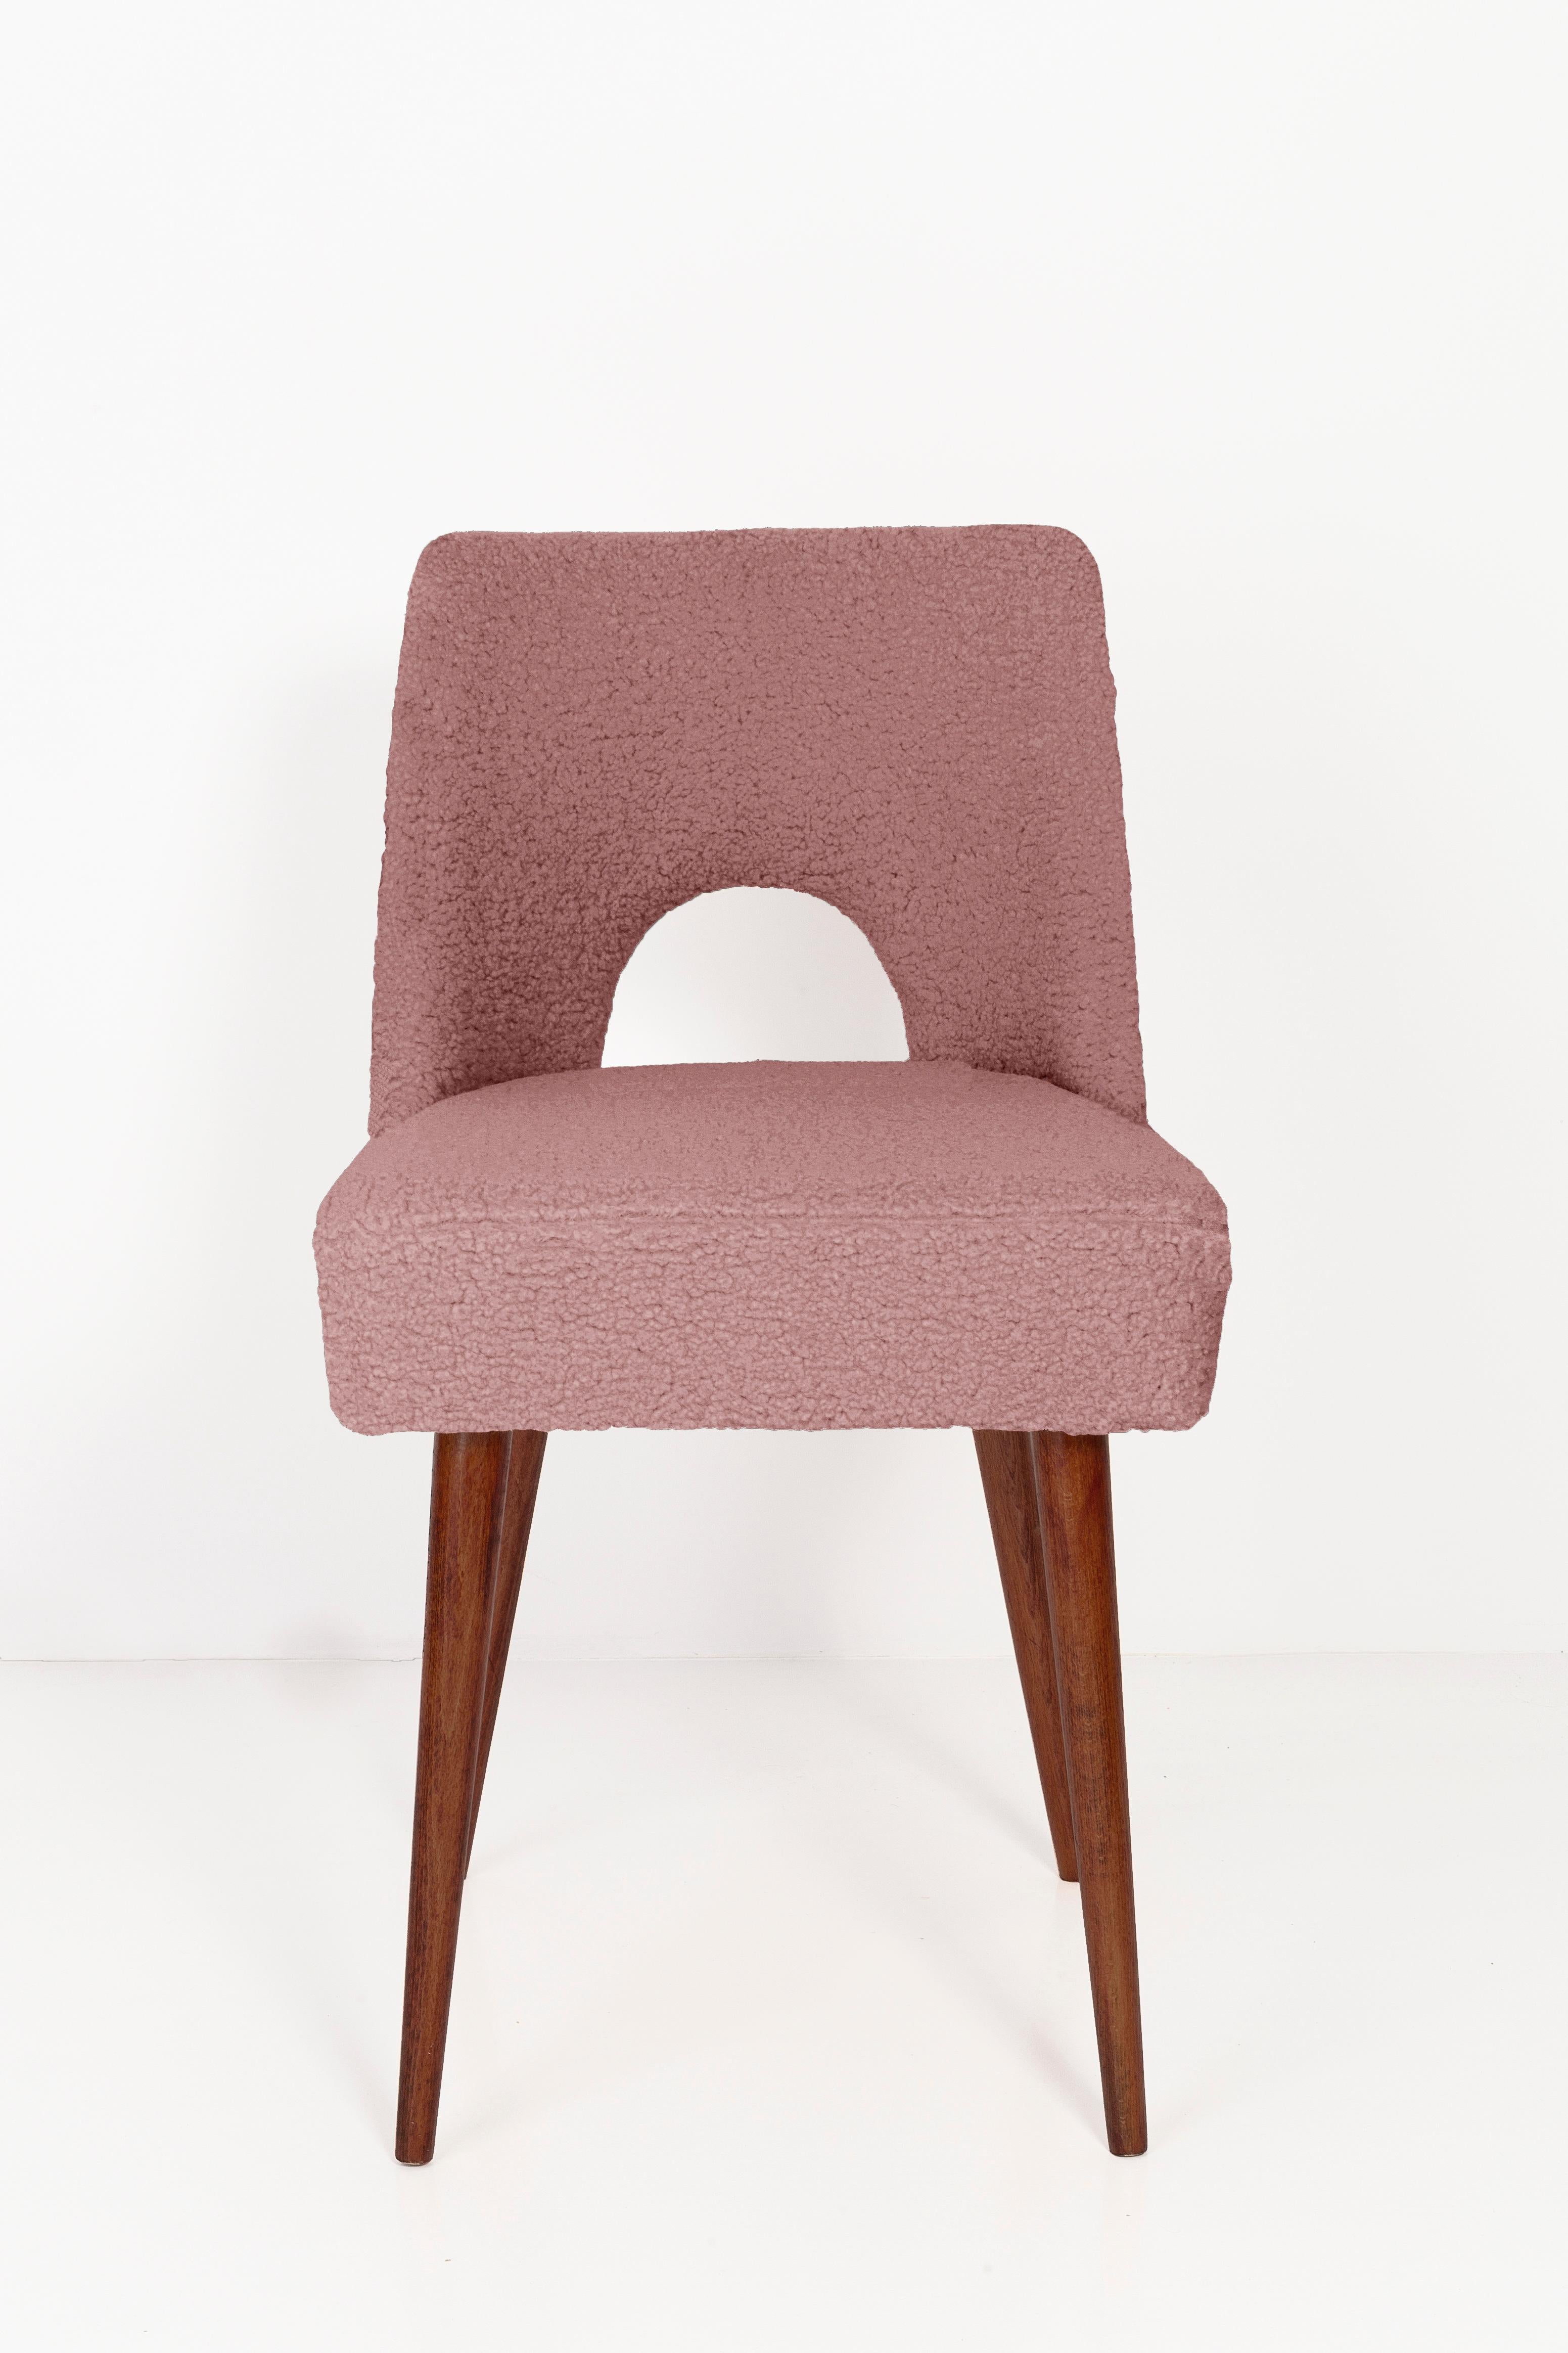 Polish Six Pink Boucle 'Shell' Chairs, Poland, 1960s For Sale